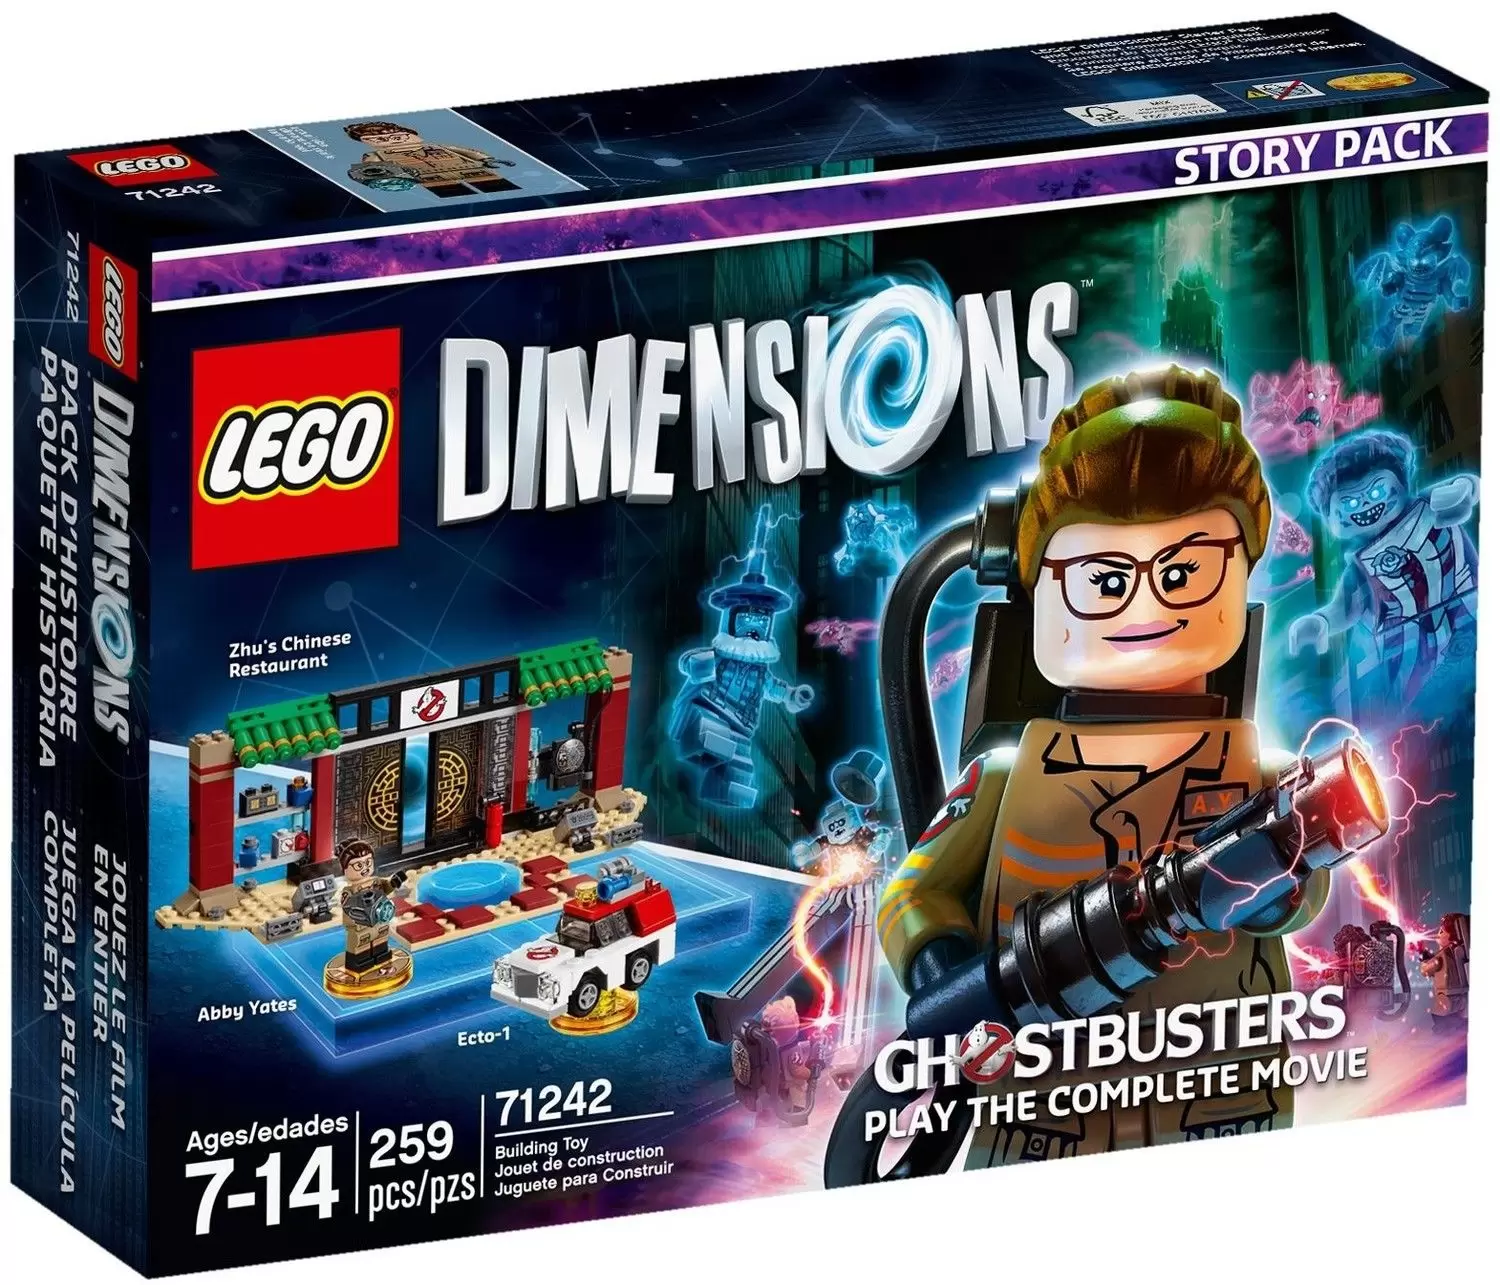 LEGO Dimensions - New Ghostbusters: Play the Complete Movie